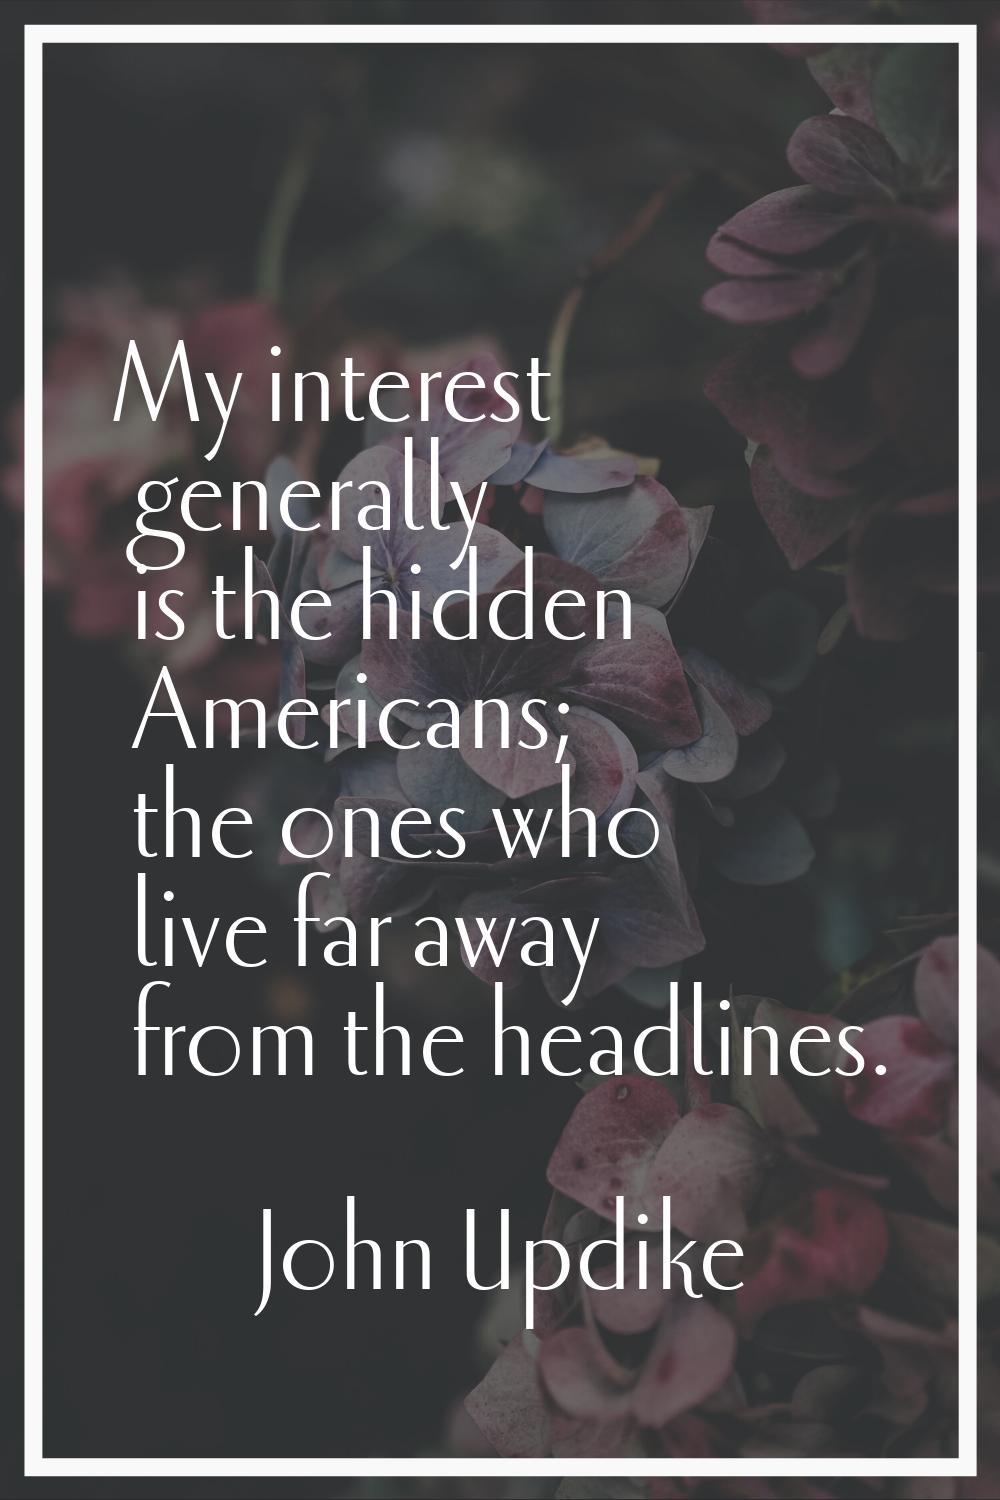 My interest generally is the hidden Americans; the ones who live far away from the headlines.